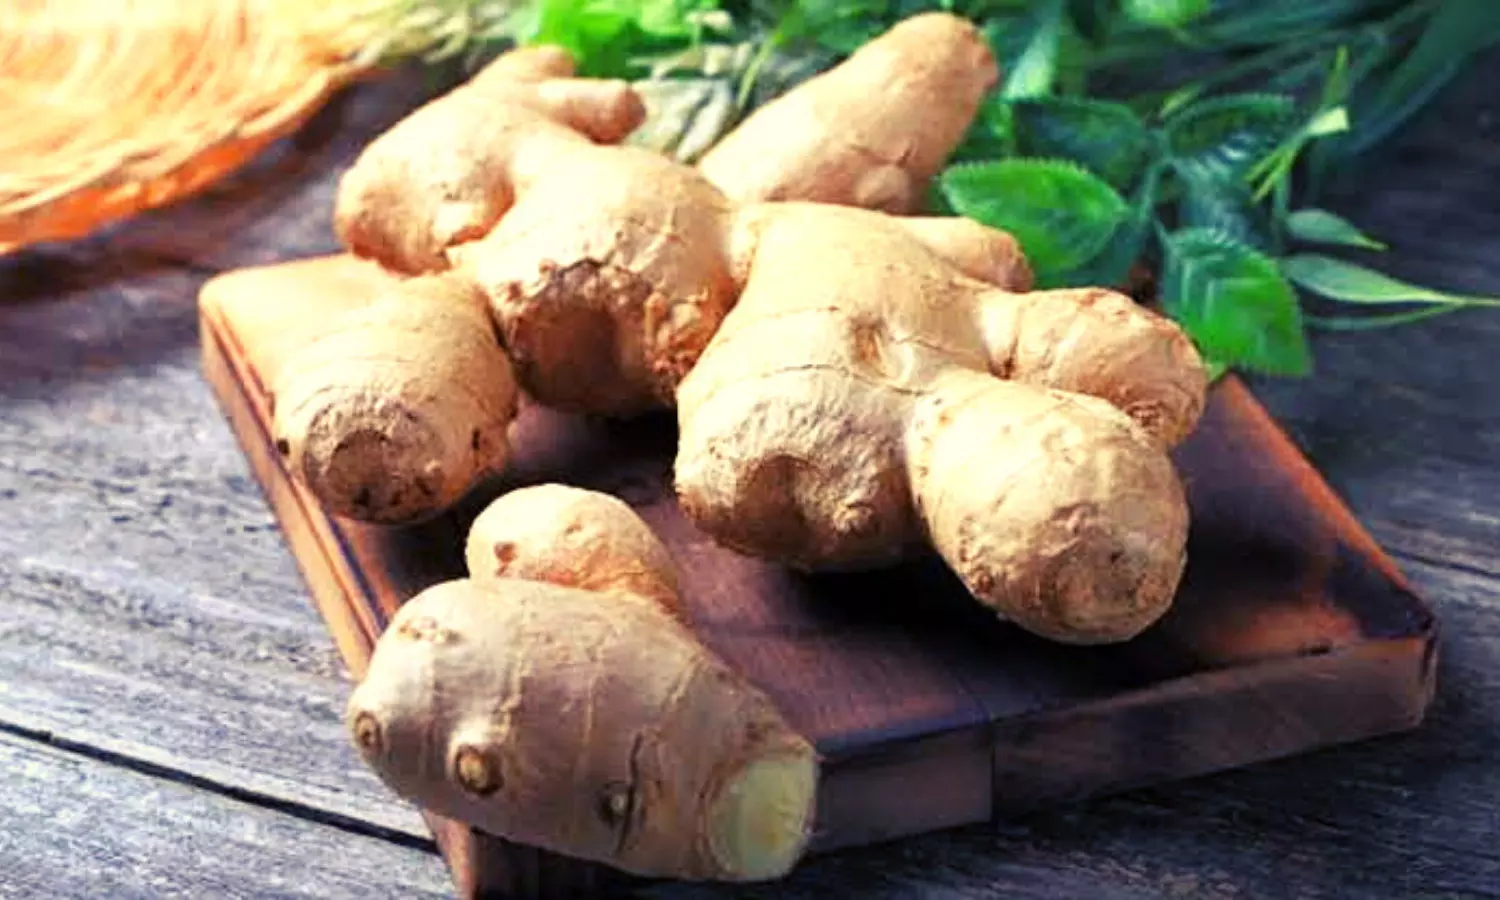 Benefits of Ginger for Health